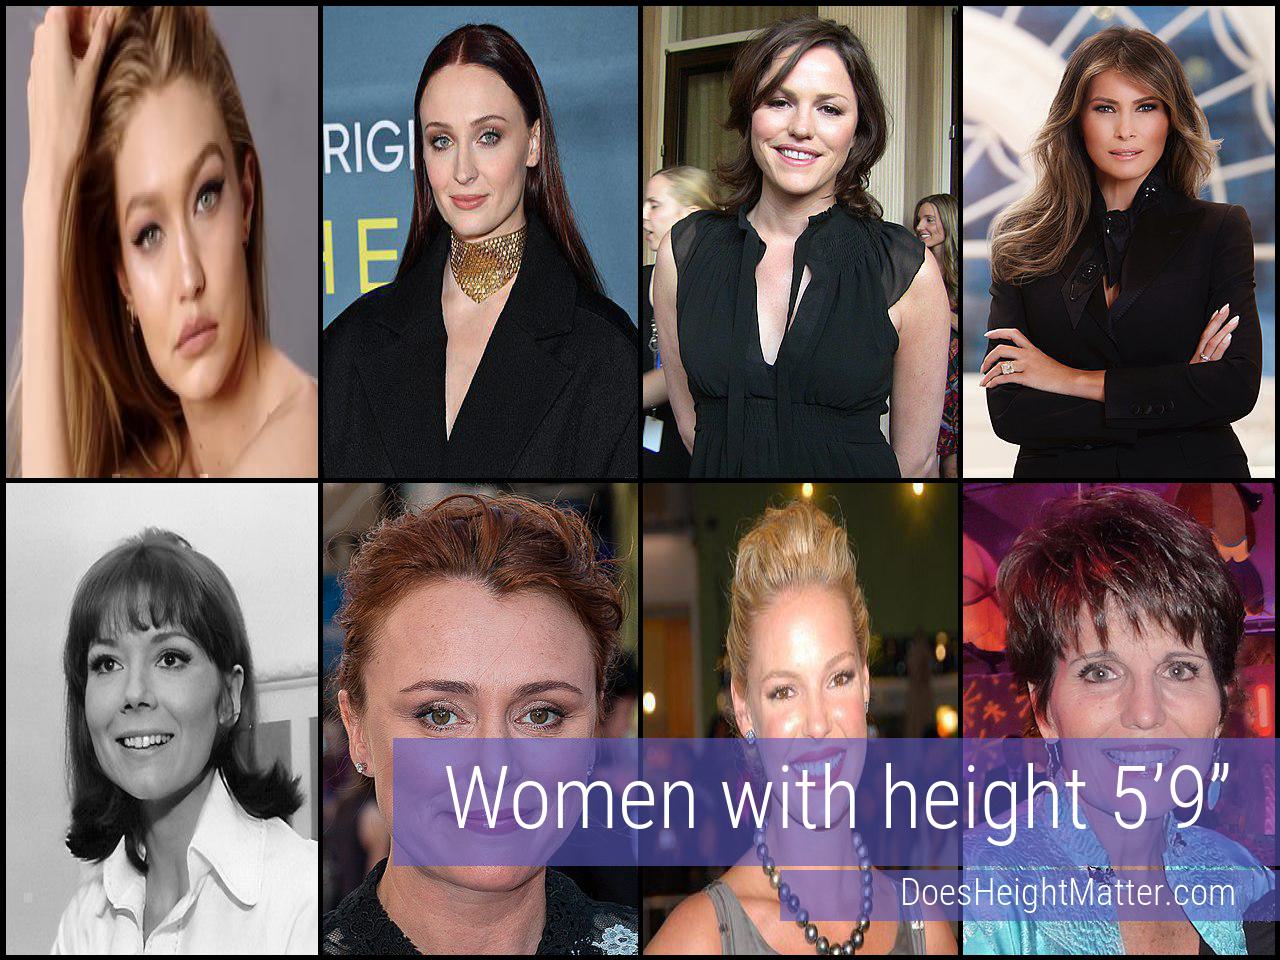 Female celebrities who are 5'9